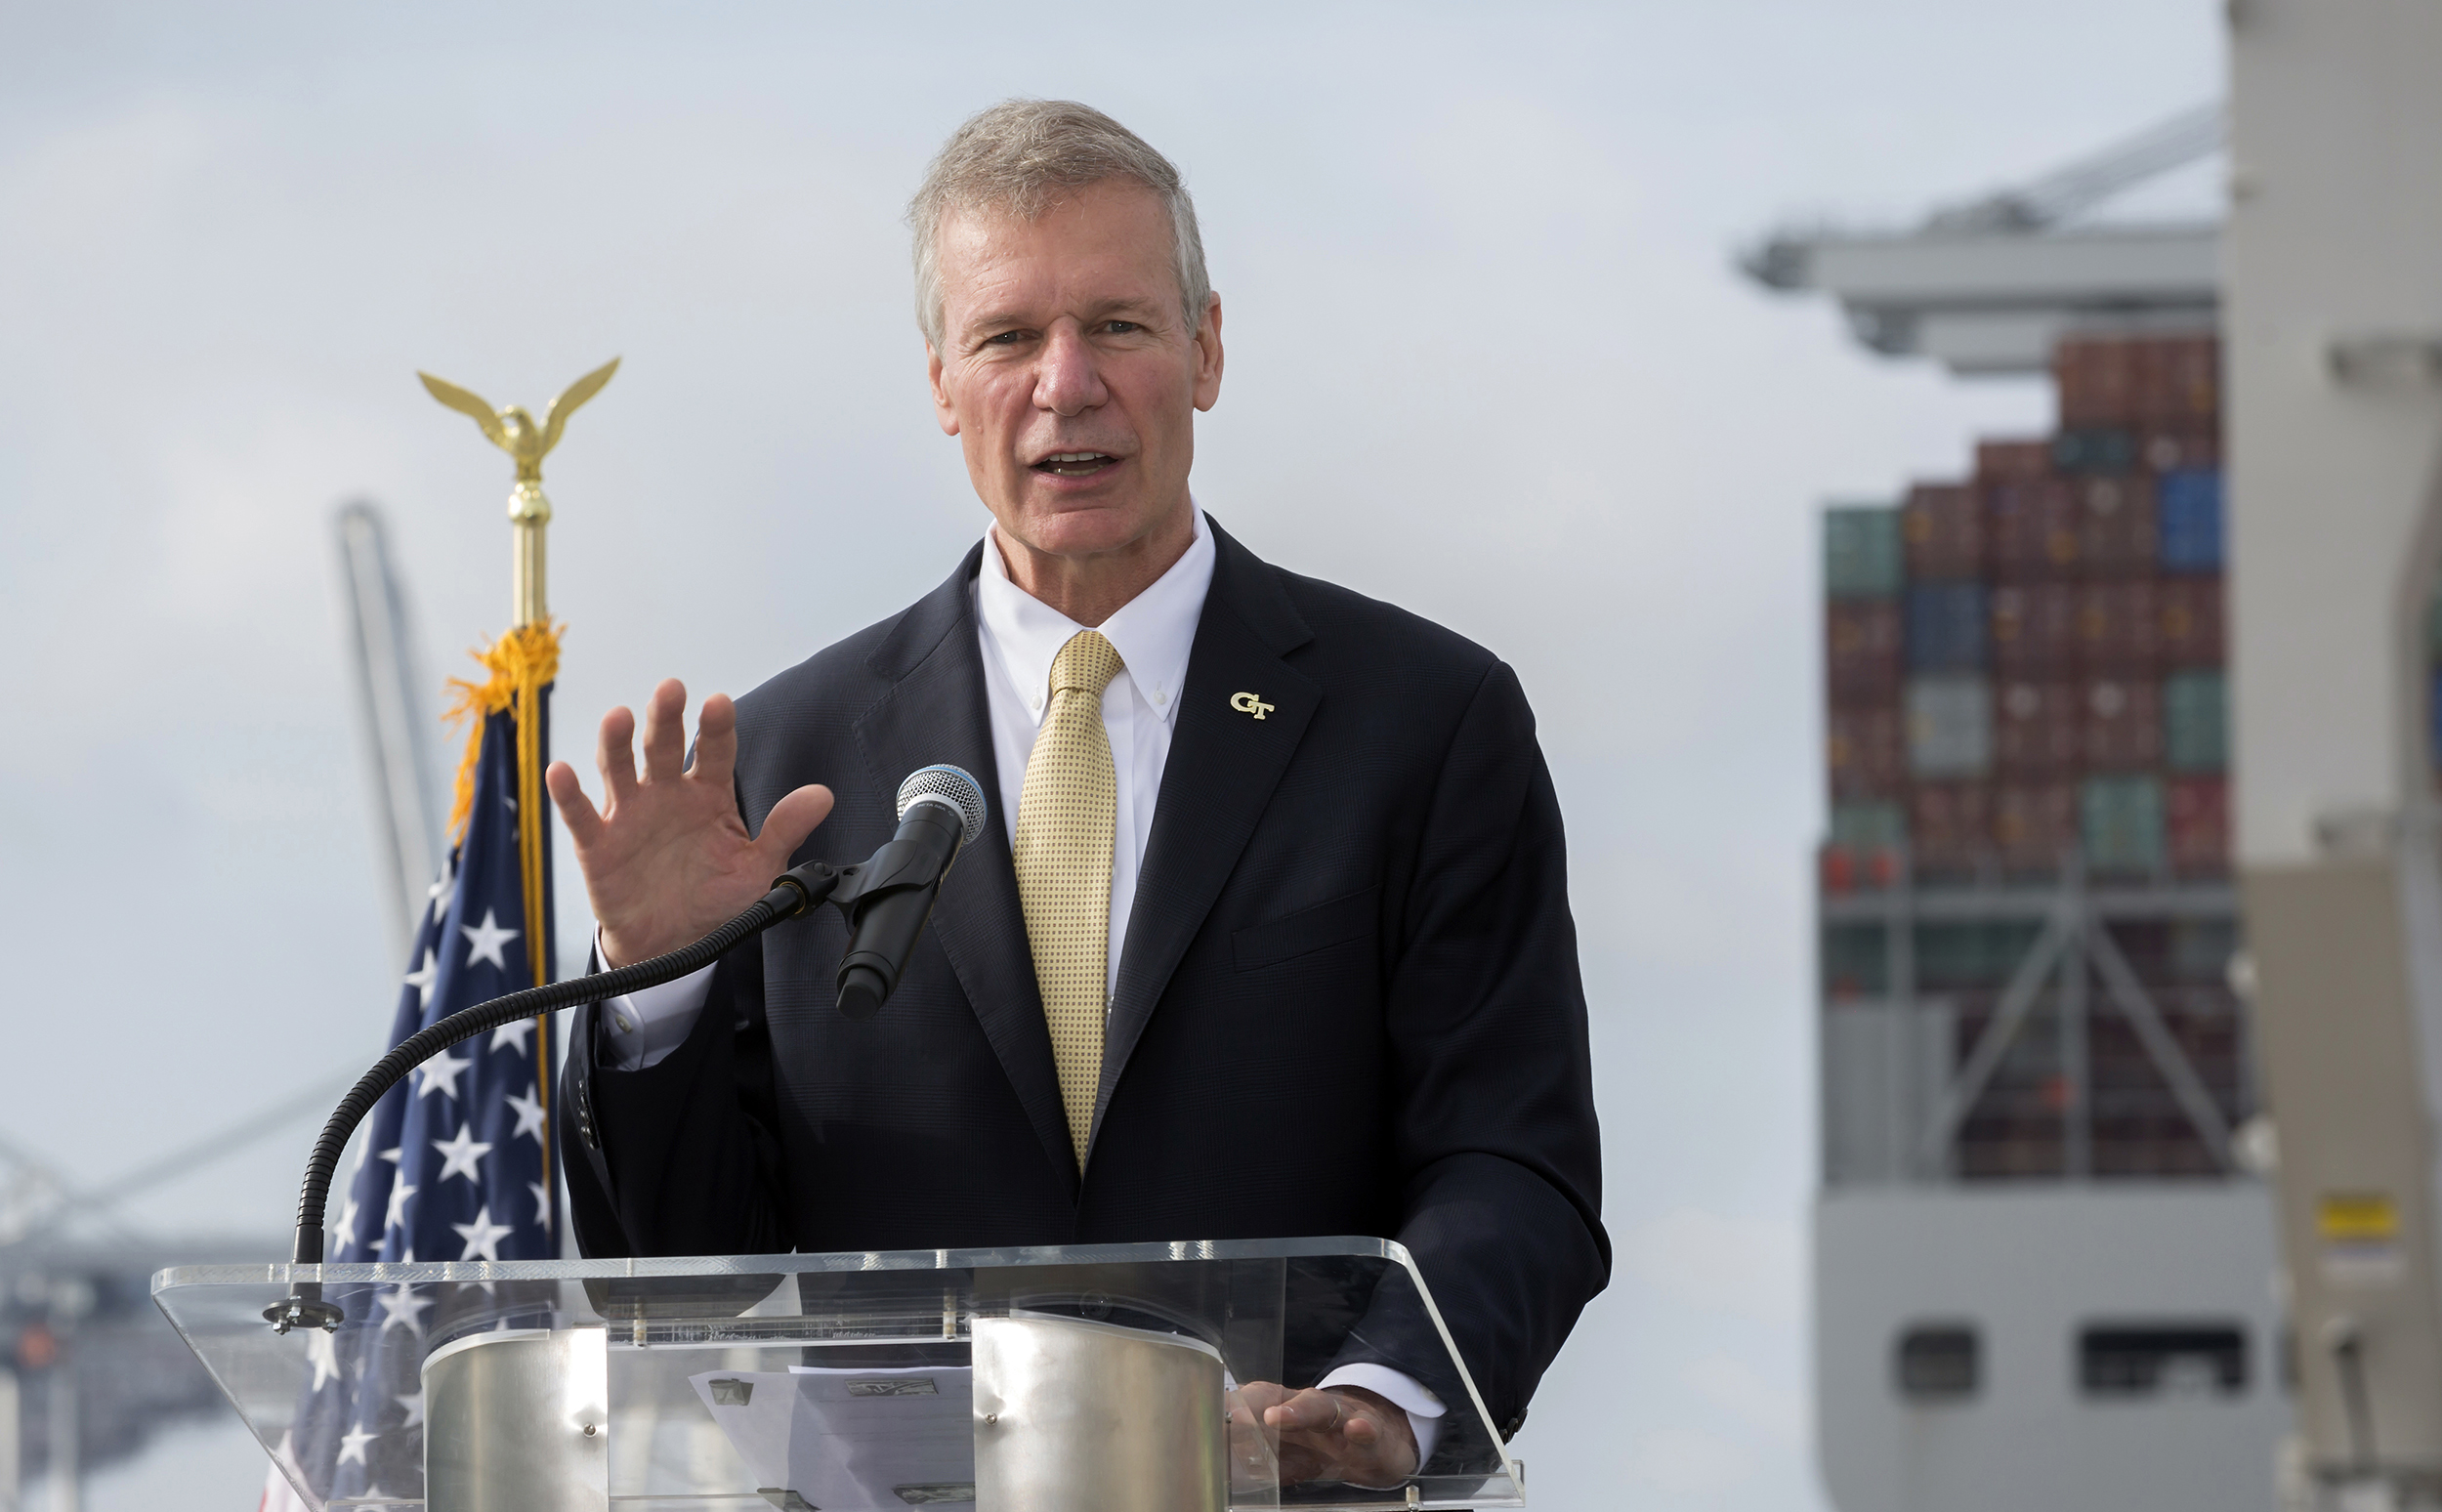 Georgia Institute of Technology President G.P. "Bud" Peterson speaks during the signing of a Memorandum of Understanding event, Tuesday, July 31, 2018, at the Port of Savannah. The memorandum creates a new relationship aimed at supporting the state’s logistics industry in economic development, research, and education. (GPA Photo/Stephen B. Morton)